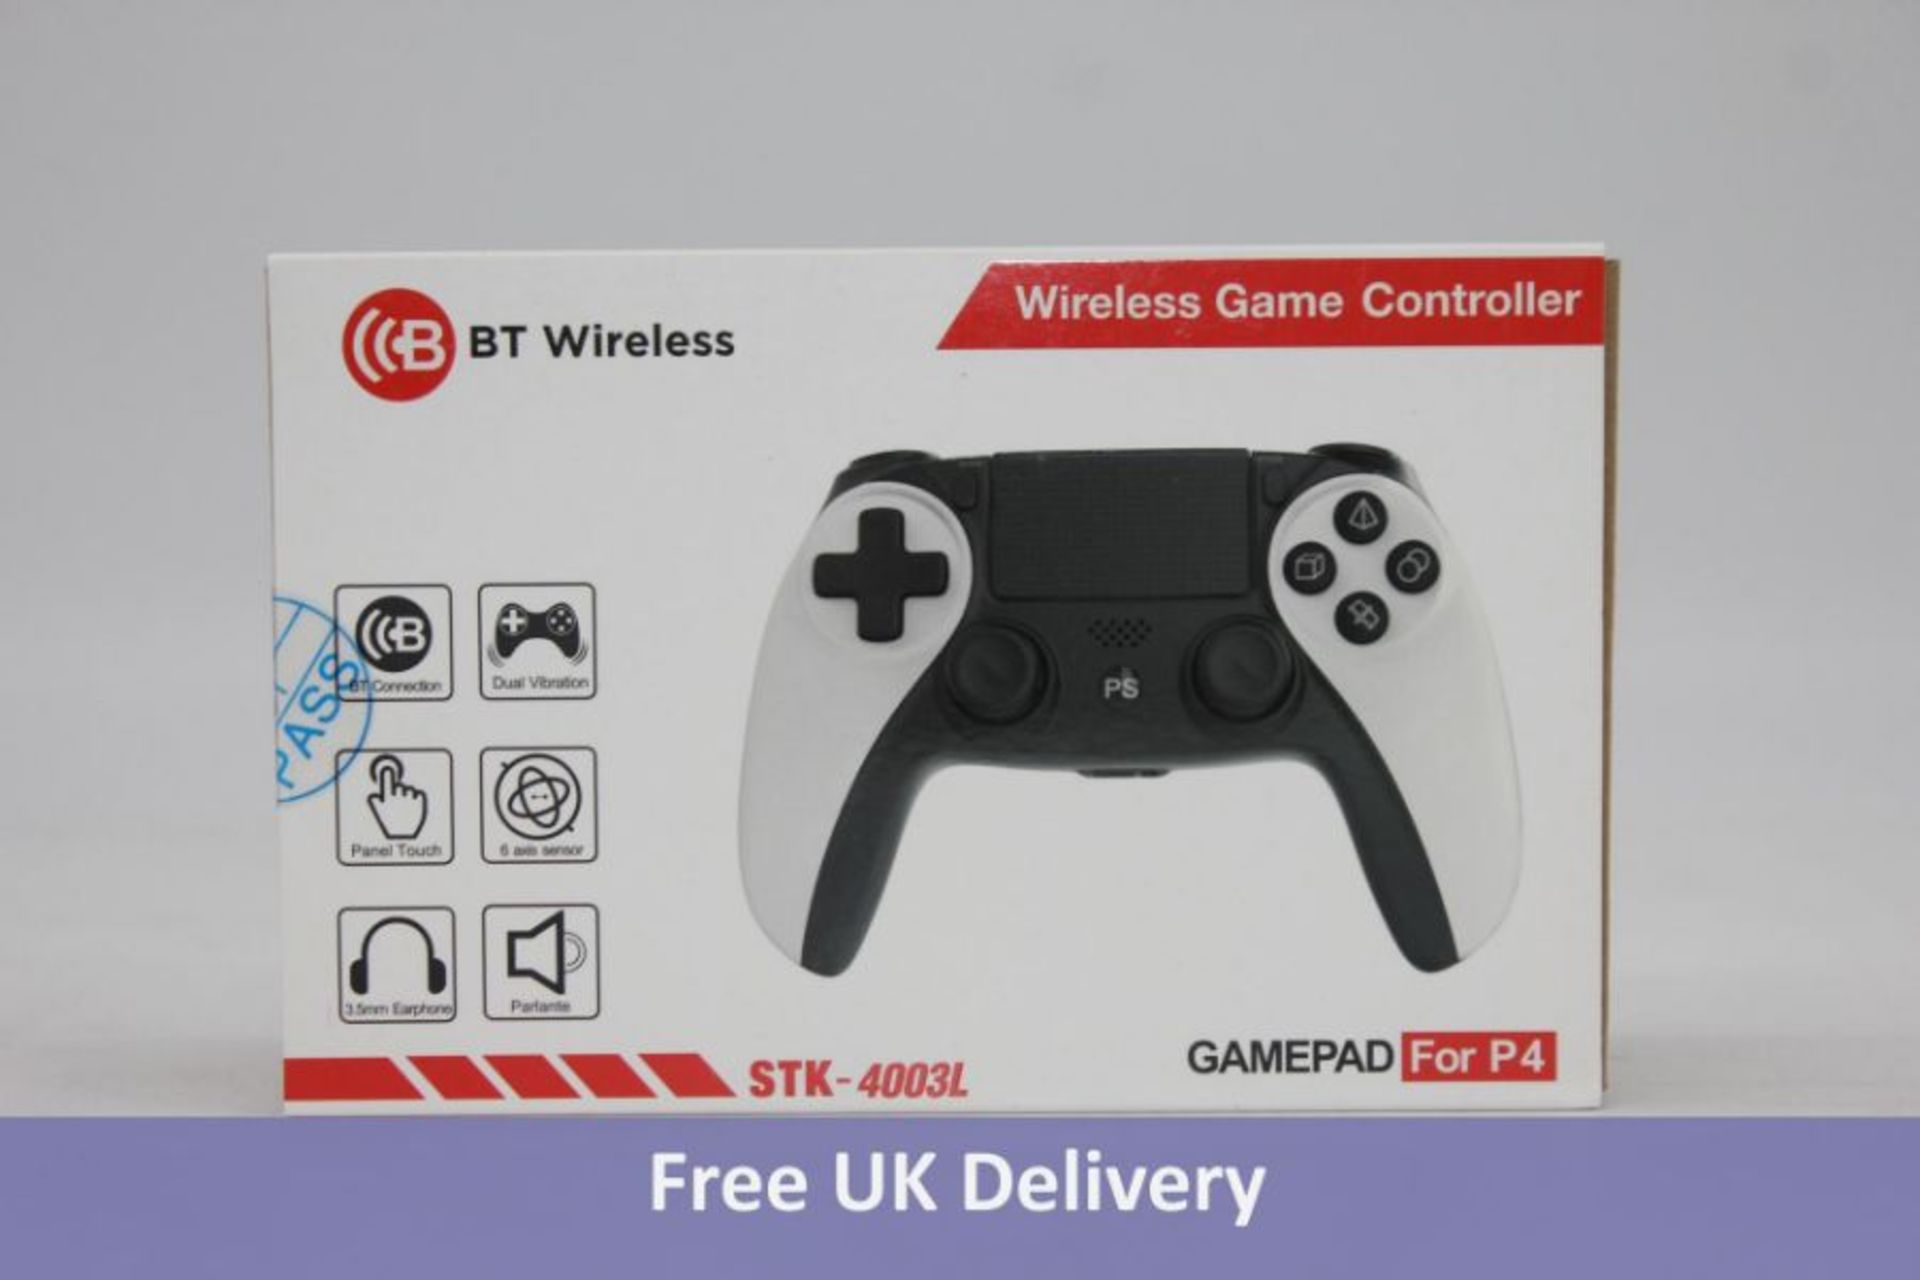 Four Bluetooth Wireless Game Pads suitable for PS4, Black/White, STK-4003L